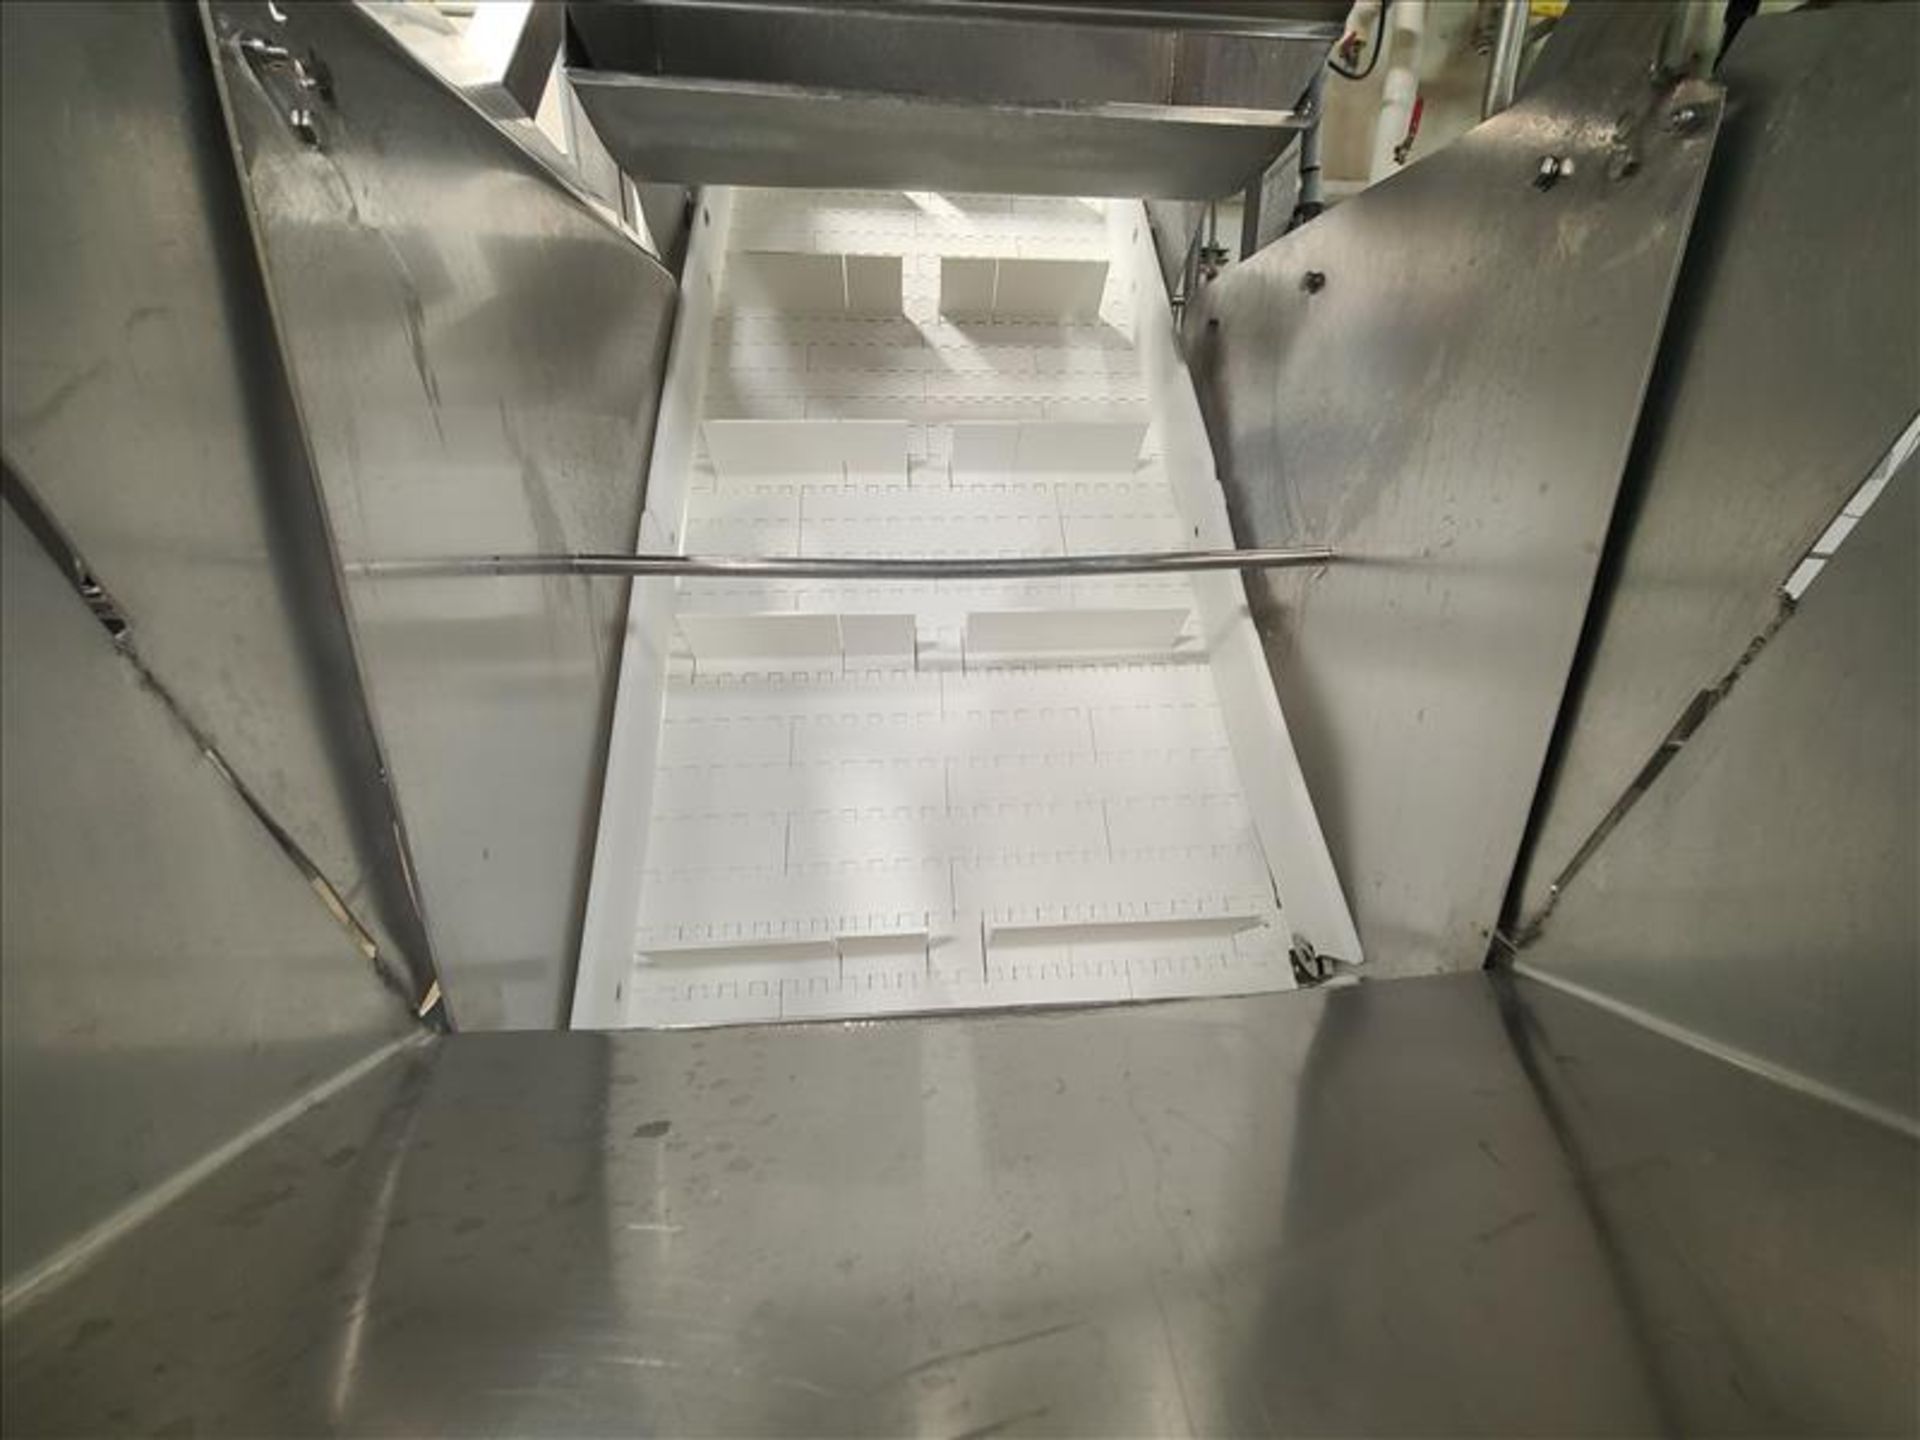 hopper/weigher, stainless steel, MetlerToledo IND780 weight indicator, c/w fluted inclined conveyor, - Image 2 of 5